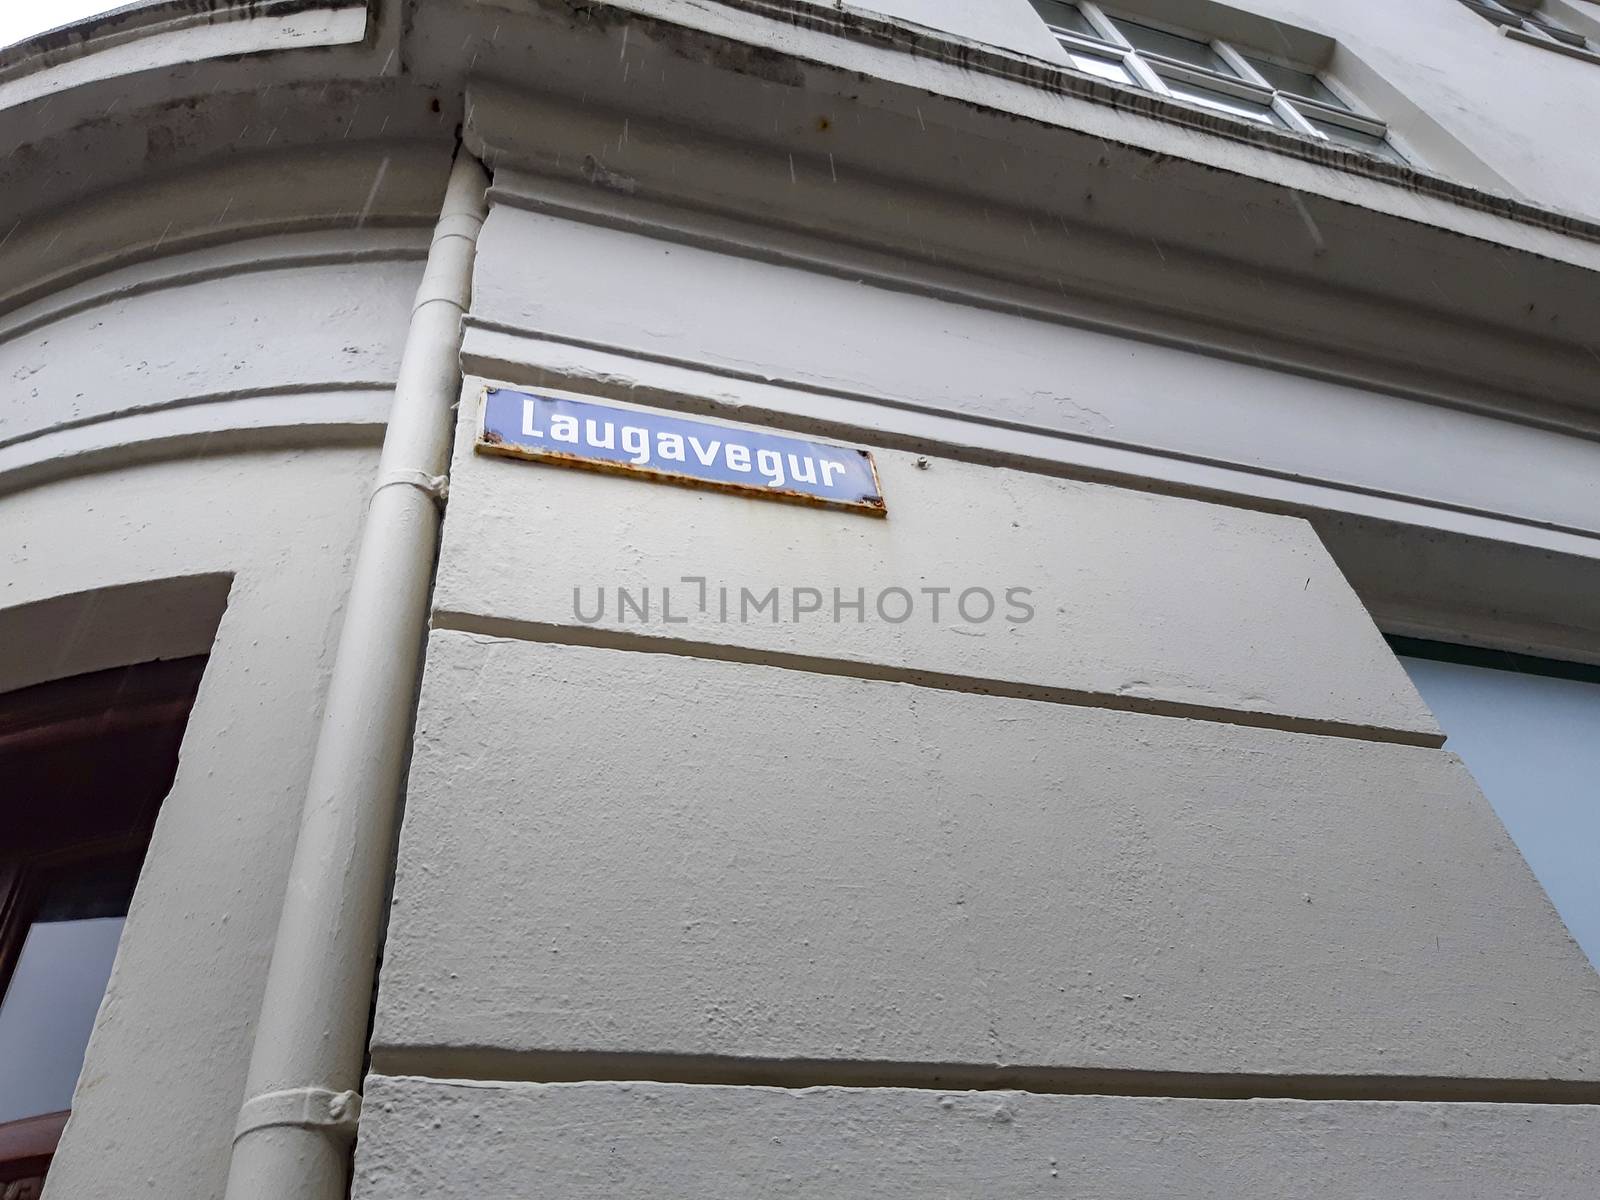 Laugavegur street sign on the wall of a house. Famous shopping street in Reykjavik, Iceland. by kb79